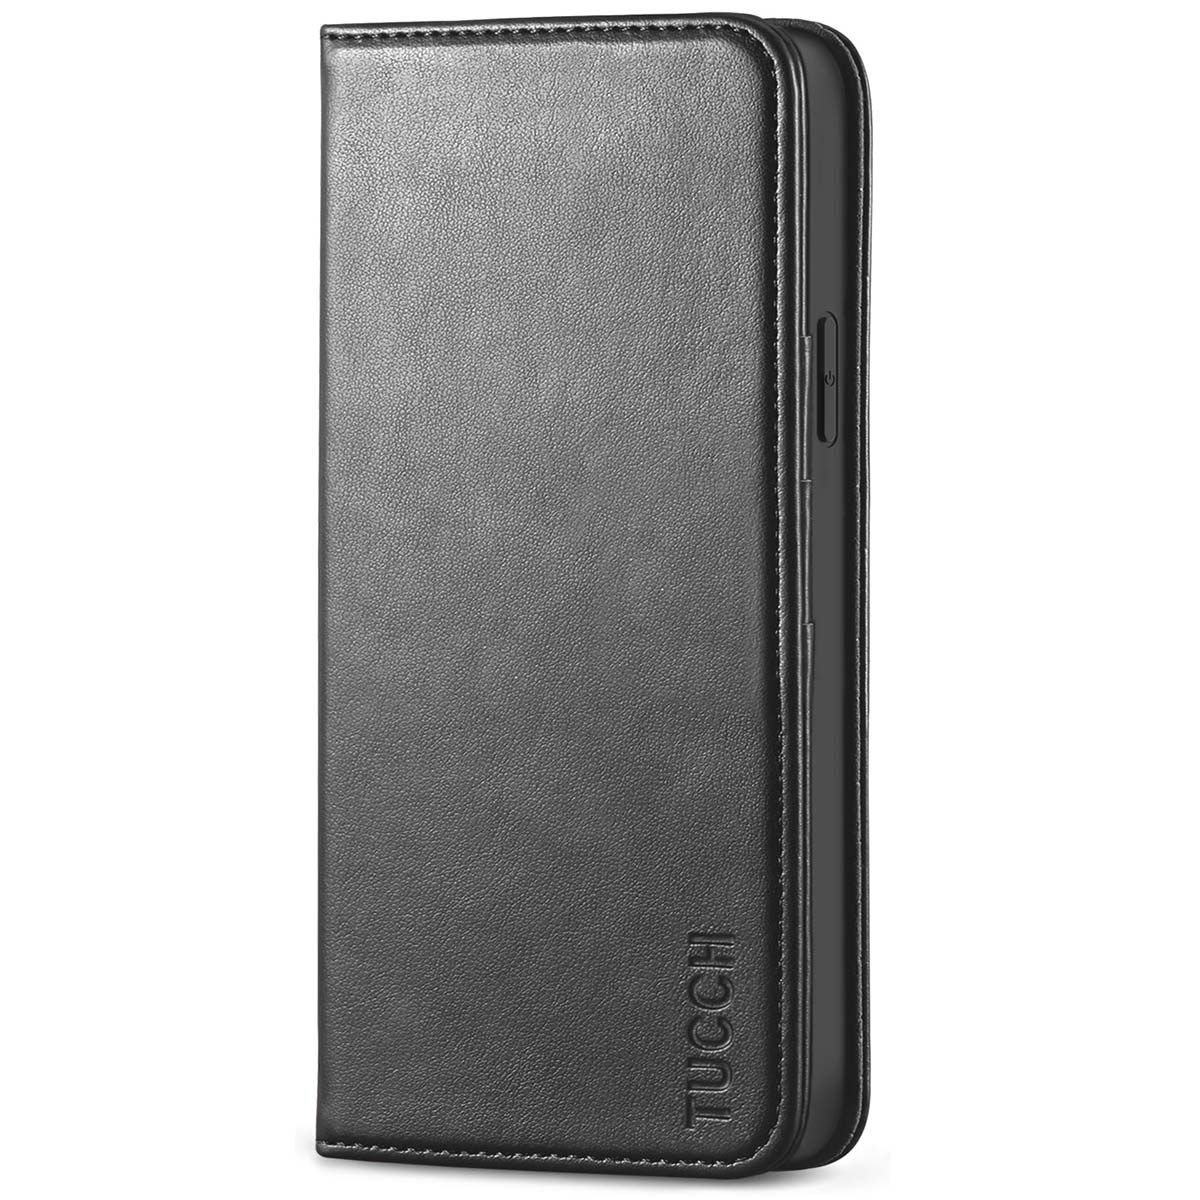 Tucch Iphone 12 Pro Max Wallet Case Iphone 12 Pro Max Pu Leather Case Flip Cover With Stand Credit Card Slots Magnetic Closure For Iphone 12 Pro Max 6 7 Inch 5g